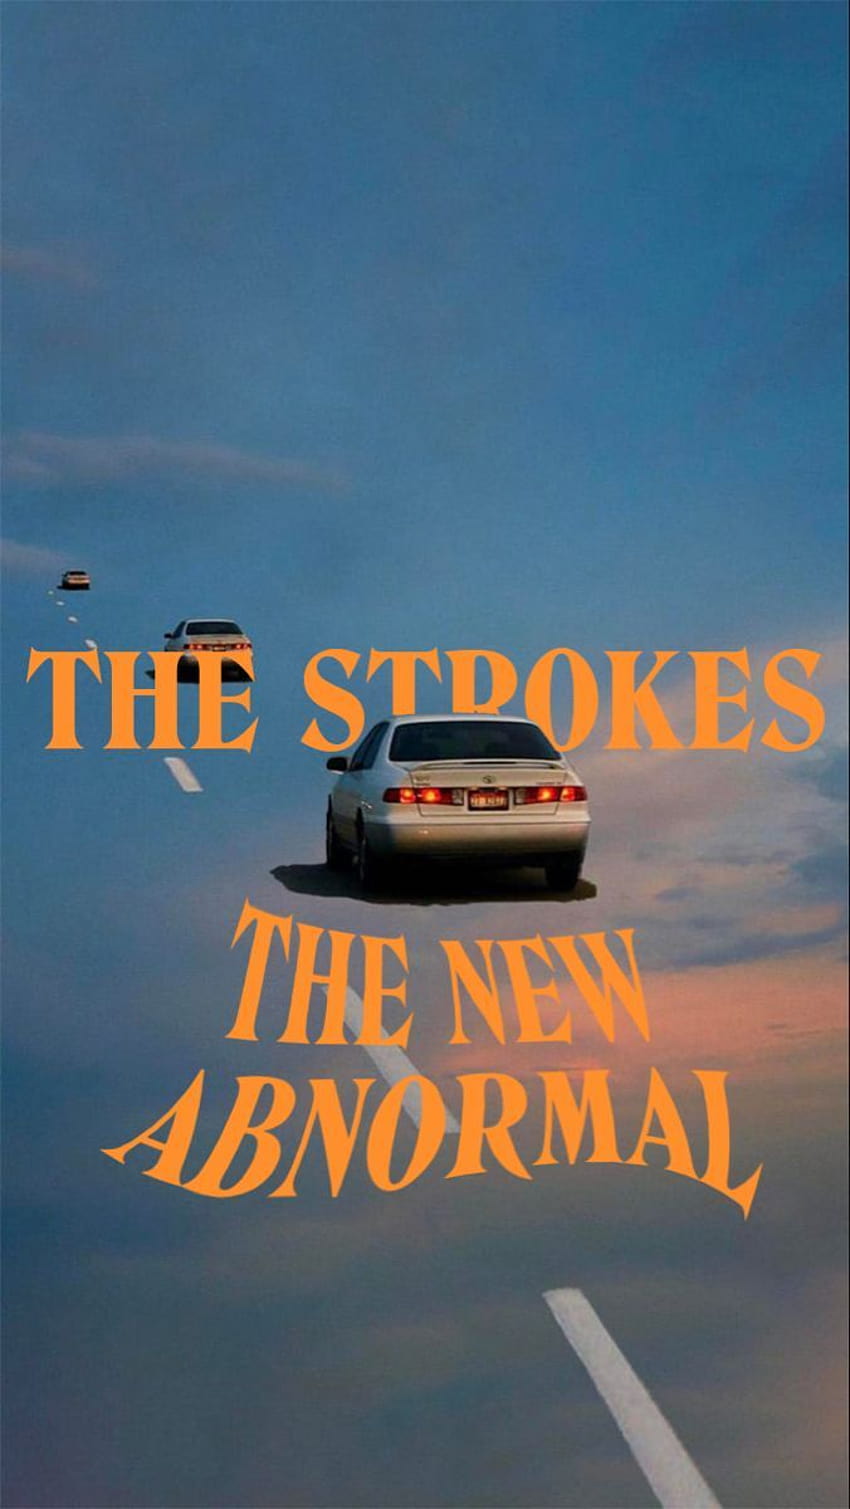 The Strokes in 2020, the new abnormal HD phone wallpaper